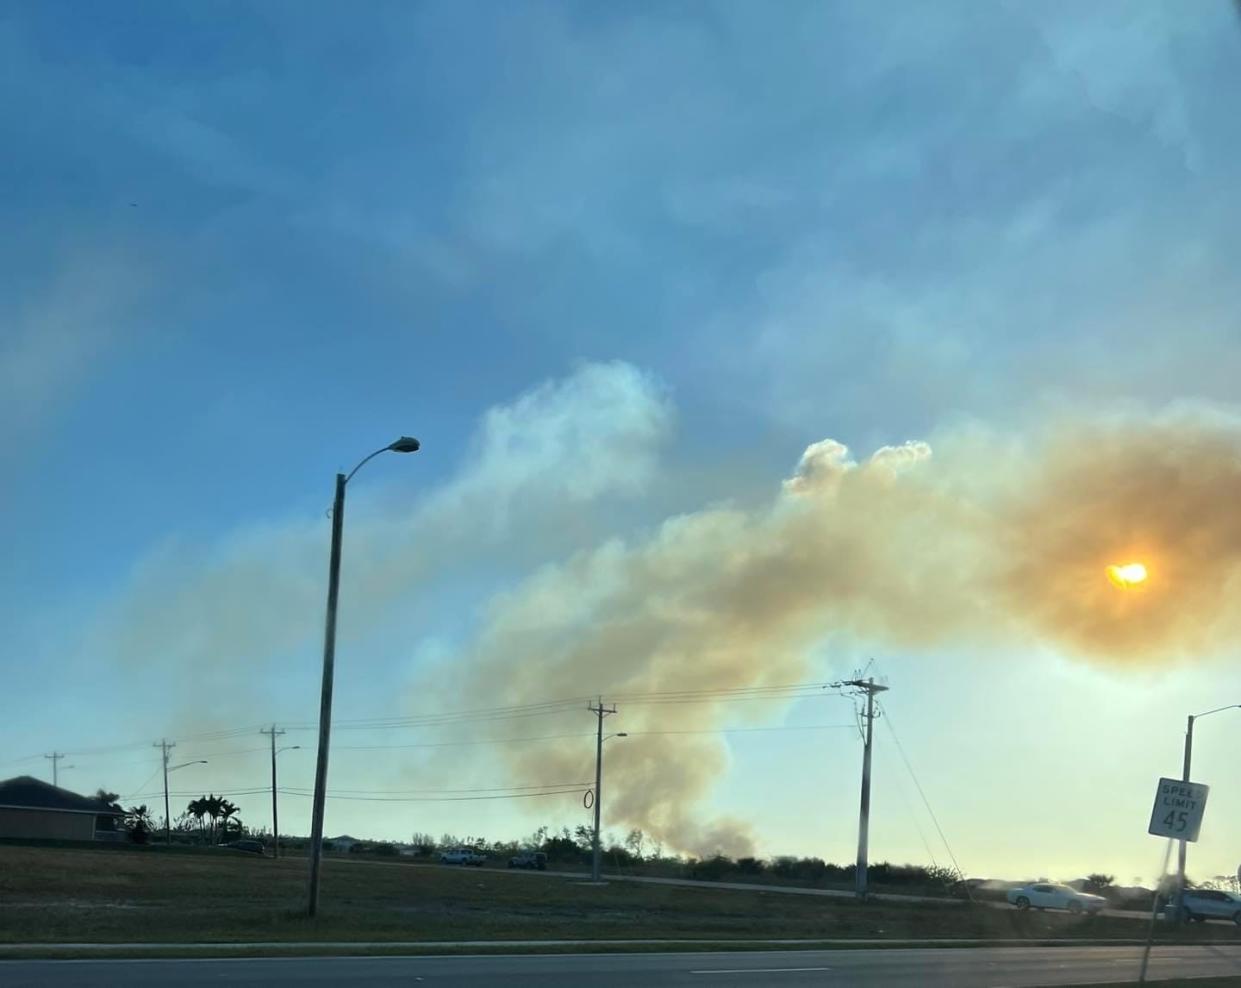 Firefighters and police were among at least eight agencies dispatched to a call alerting of a brush fire Wednesday afternoon. The 10-acre fire was 75% contained by Thursday morning, Cape Coral Fire said.